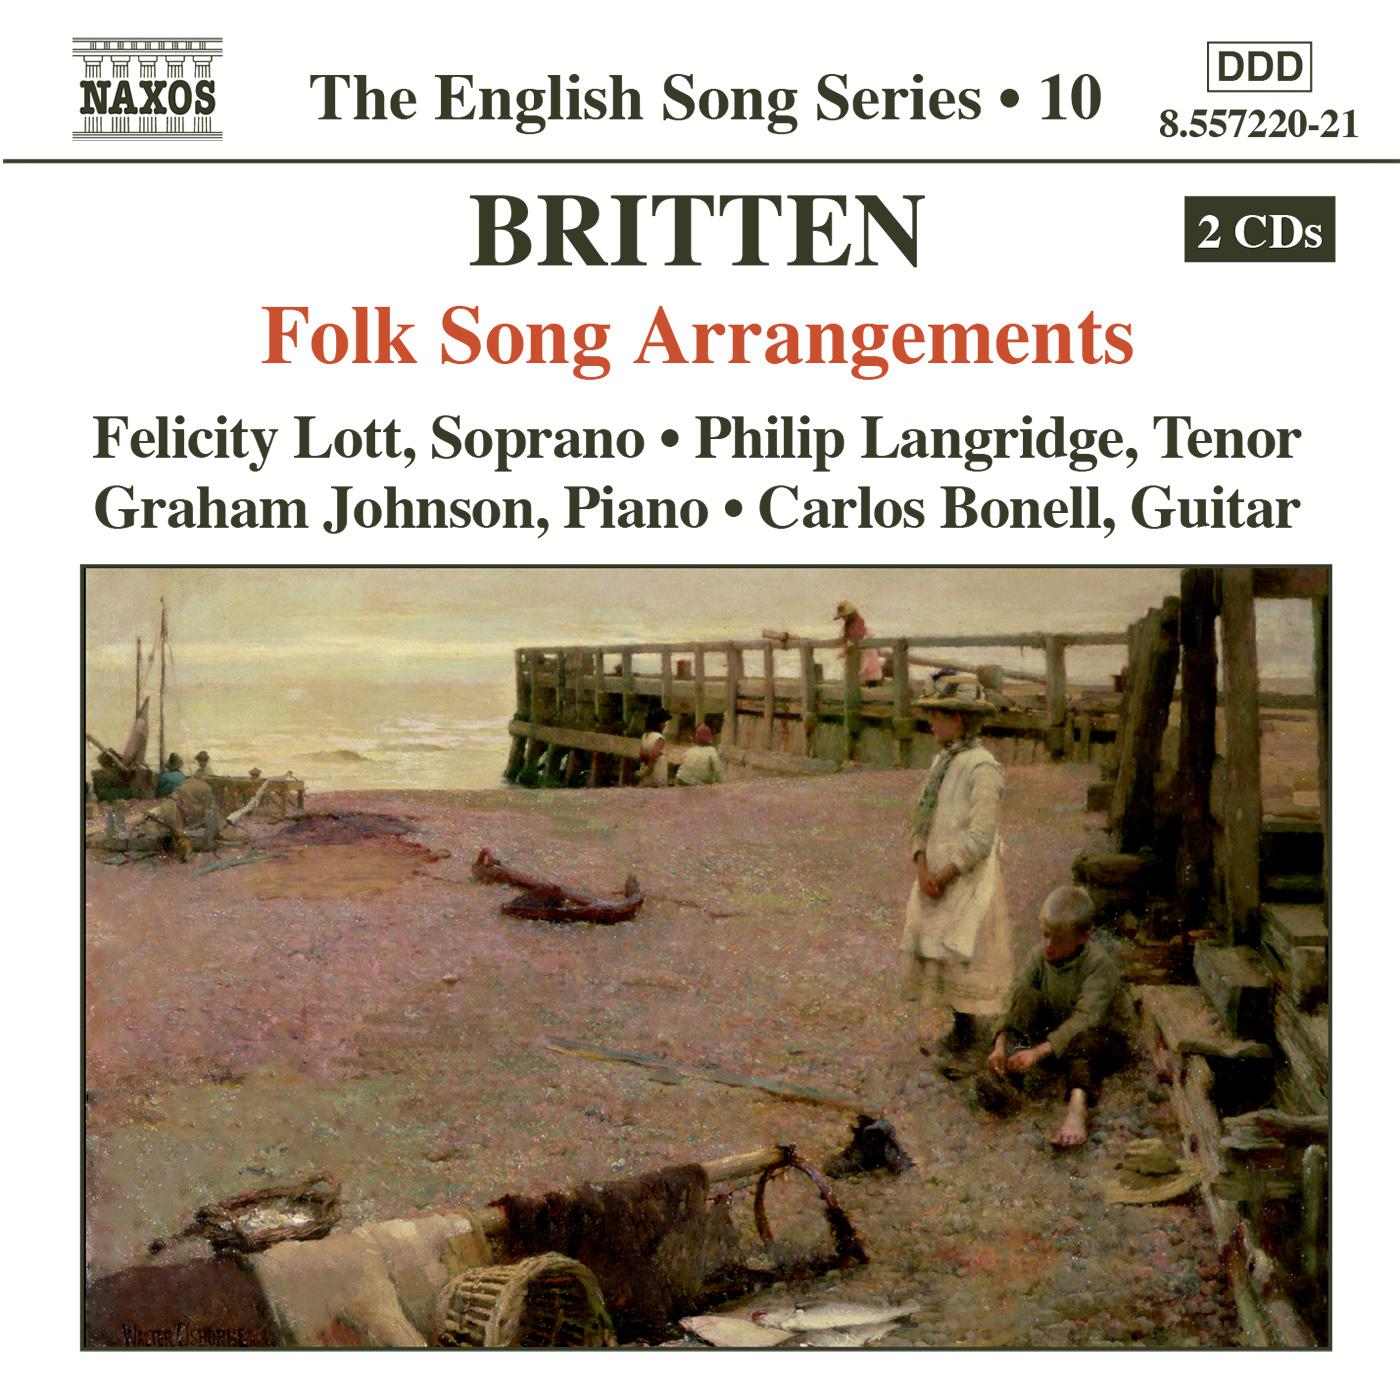 Folk Song Arrangements, Vol. 3, "British Isles": Come you not from Newcastle?